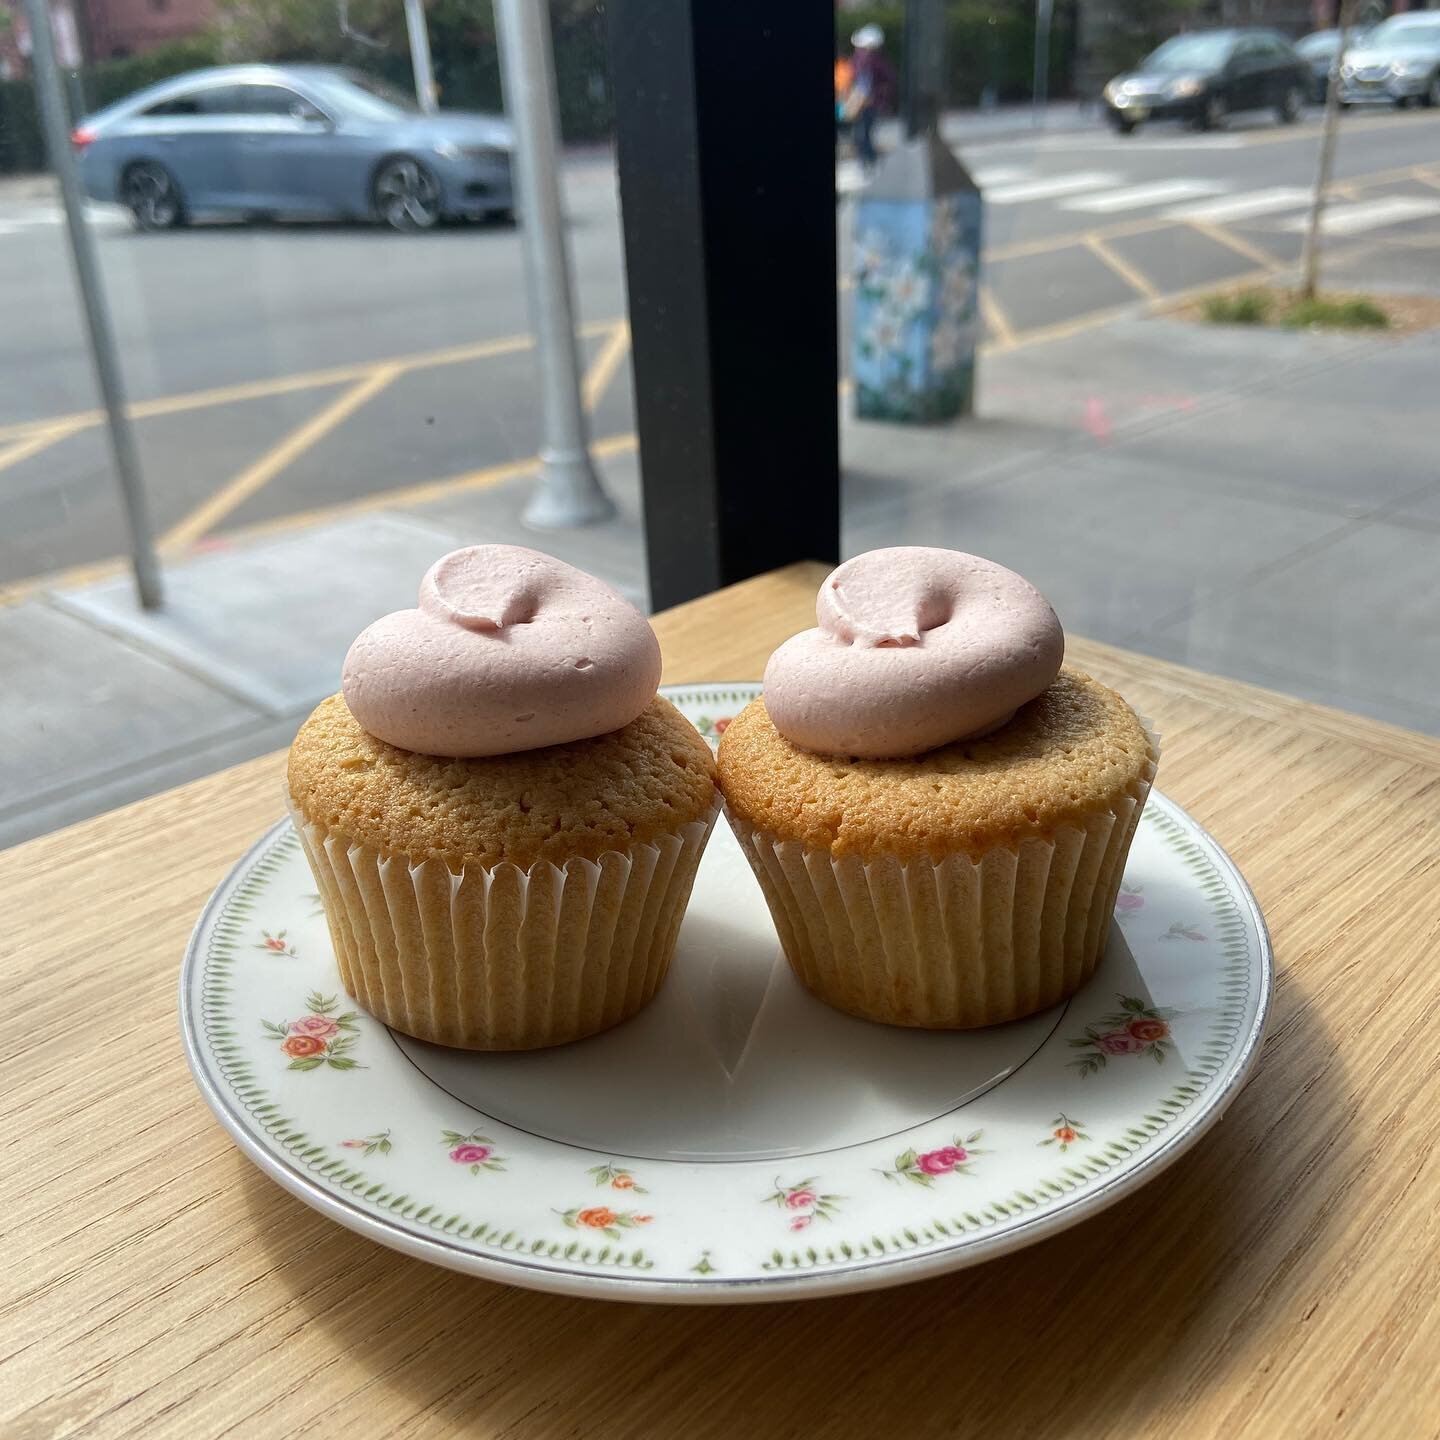 Honey Raspberry cupcakes are back for a limited time! Stop by and pick one up while you can. 😋🍯